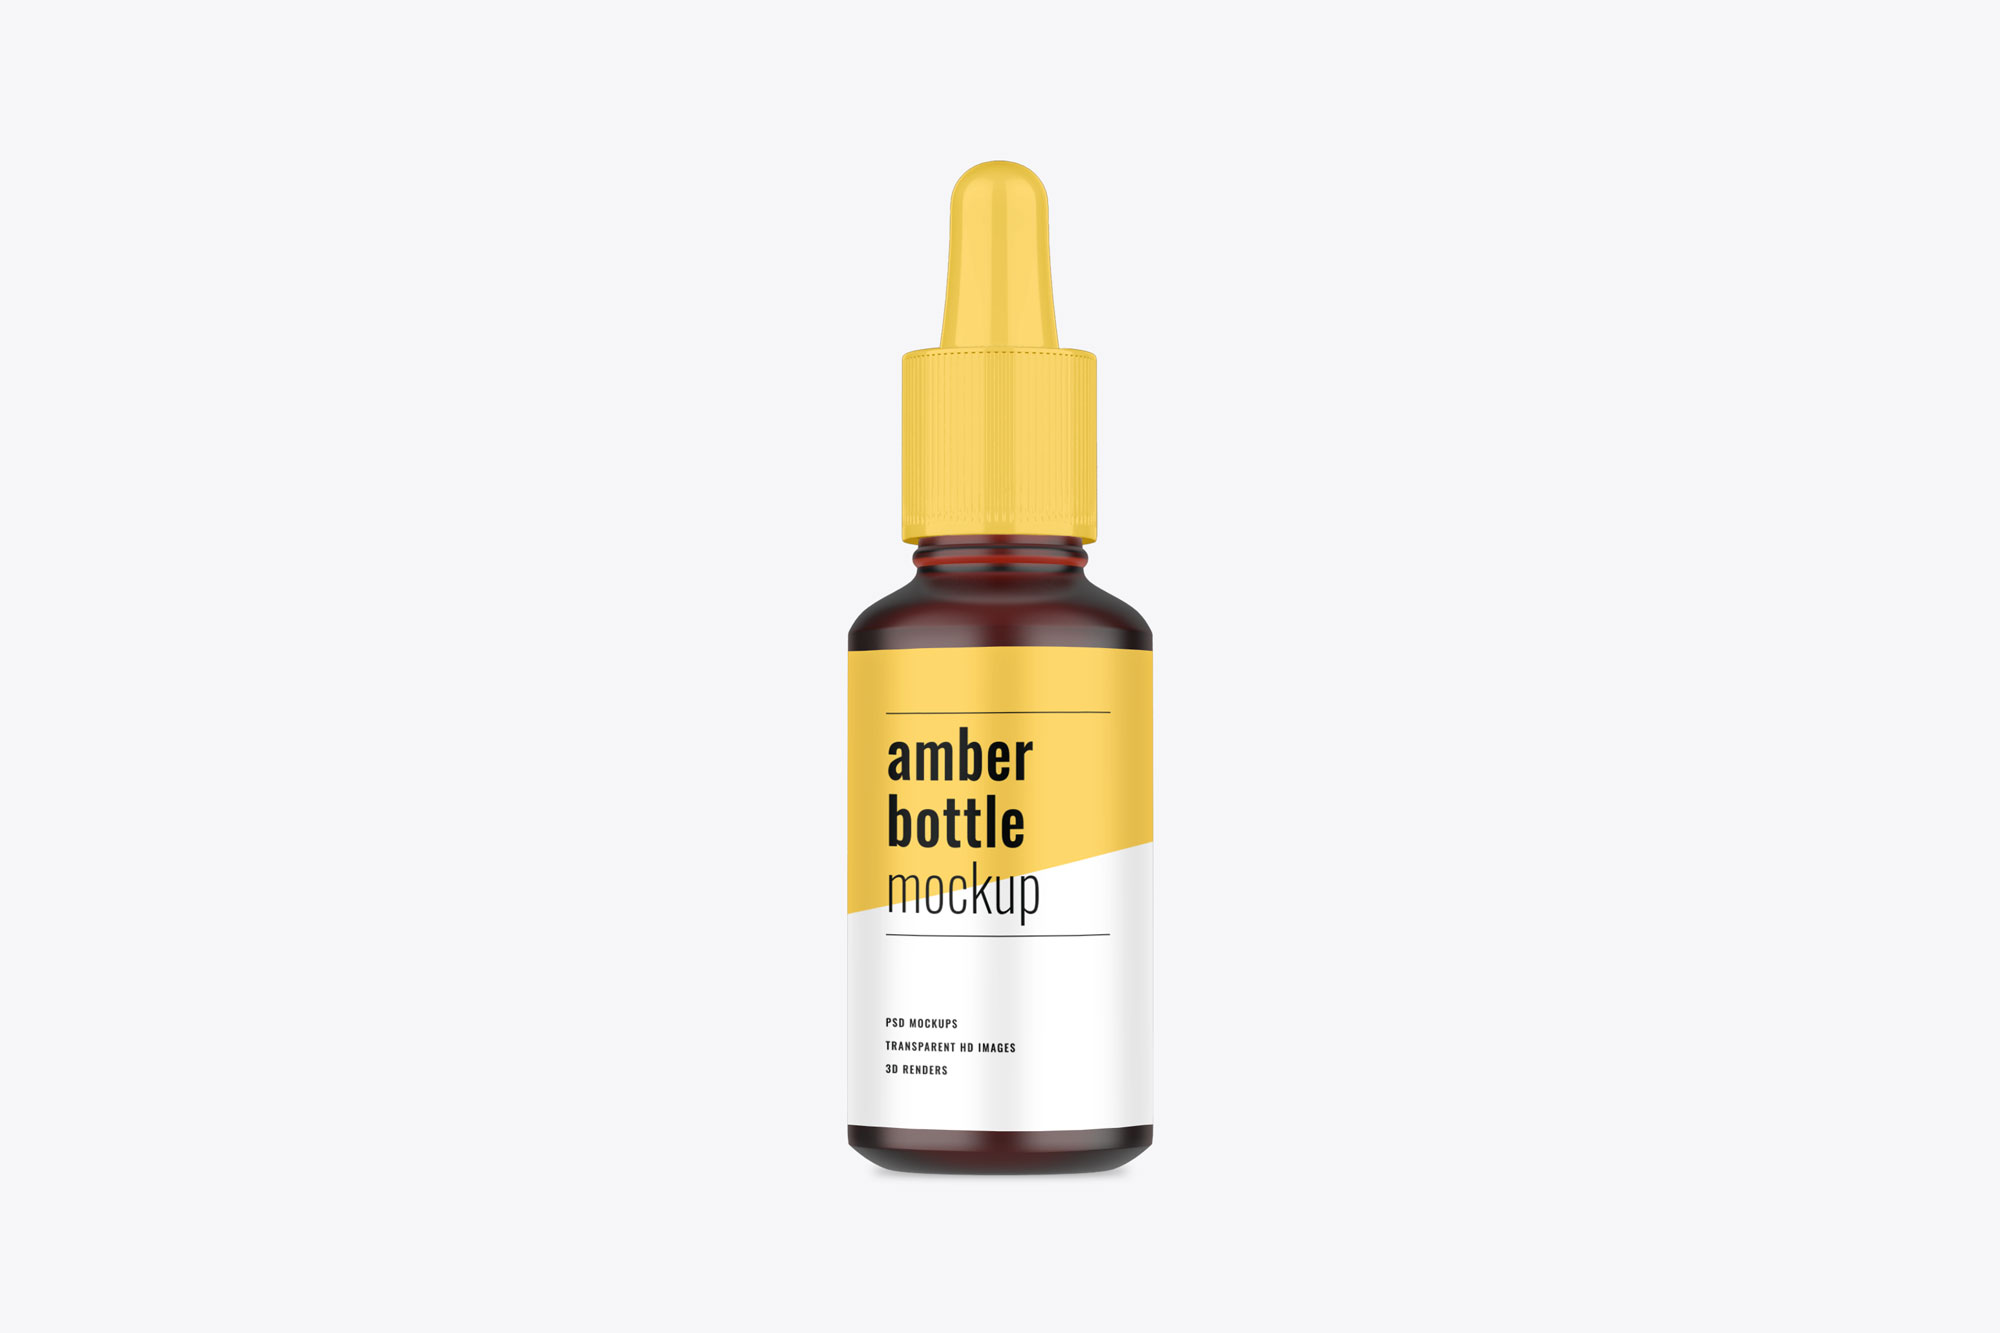 Black Dropper Bottle PSD Mockup with yellow and white label and cap.